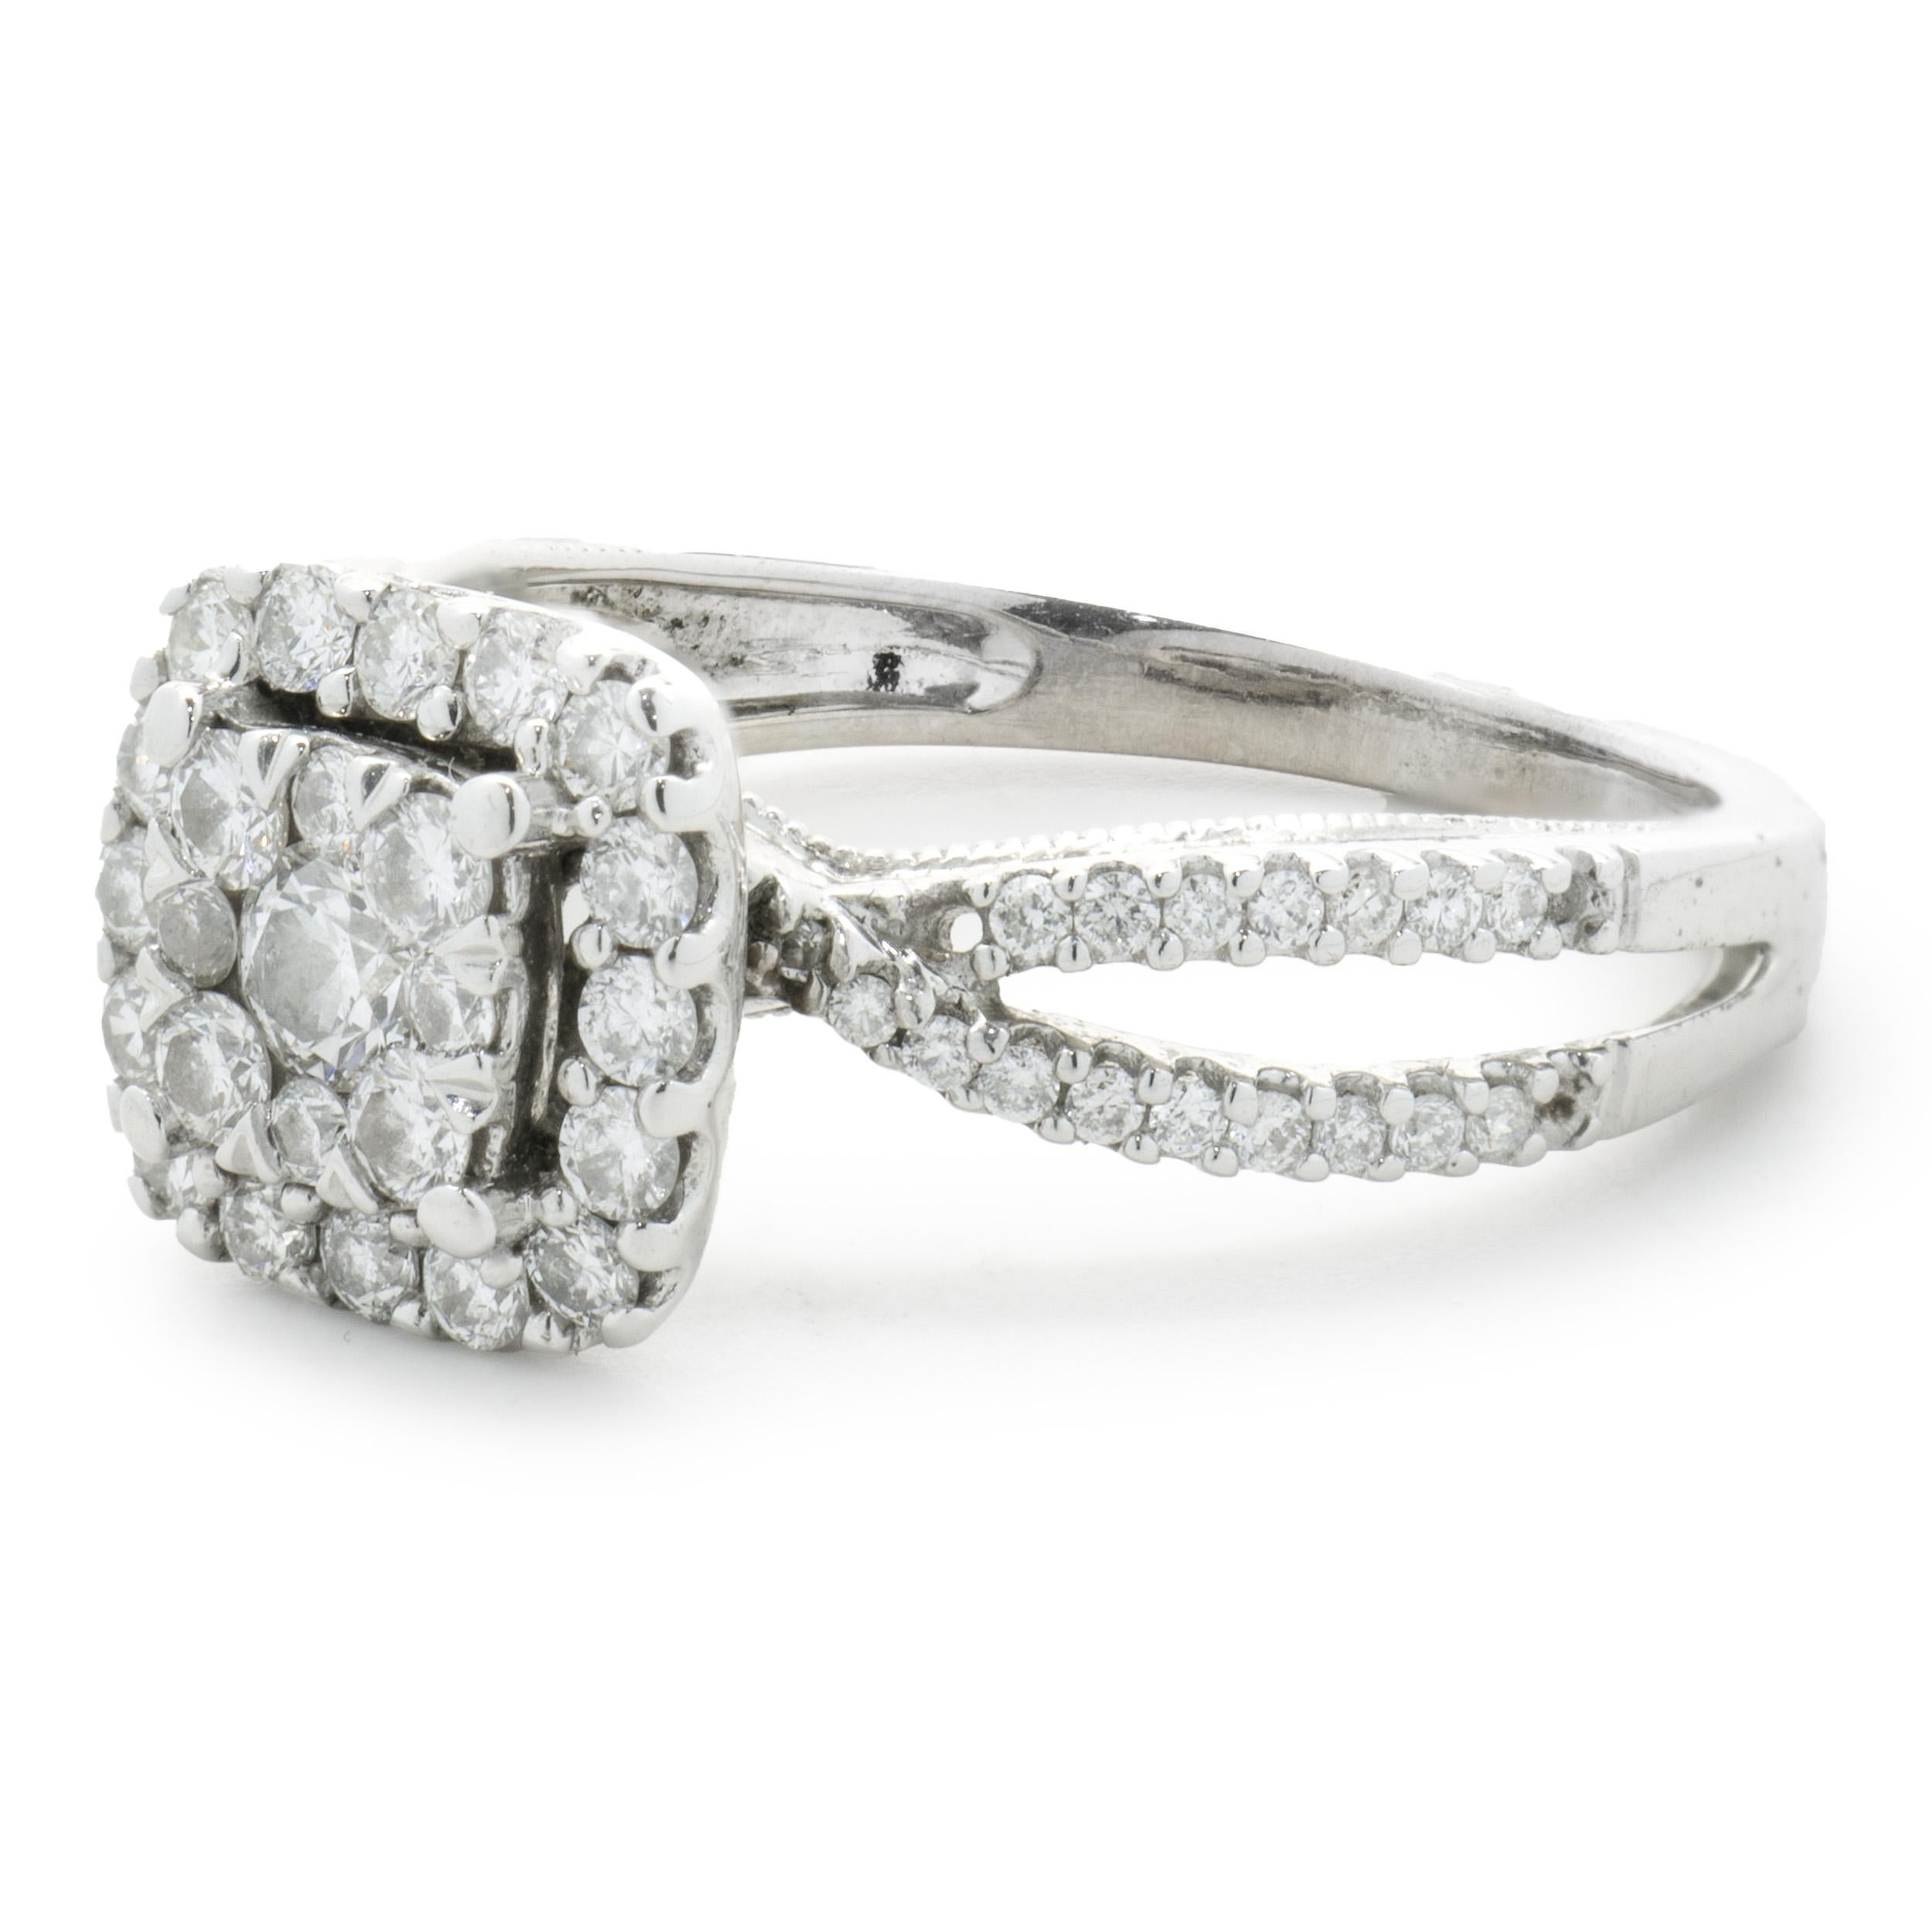 14 Karat White Gold Diamond Cluster Engagement Ring In Excellent Condition For Sale In Scottsdale, AZ